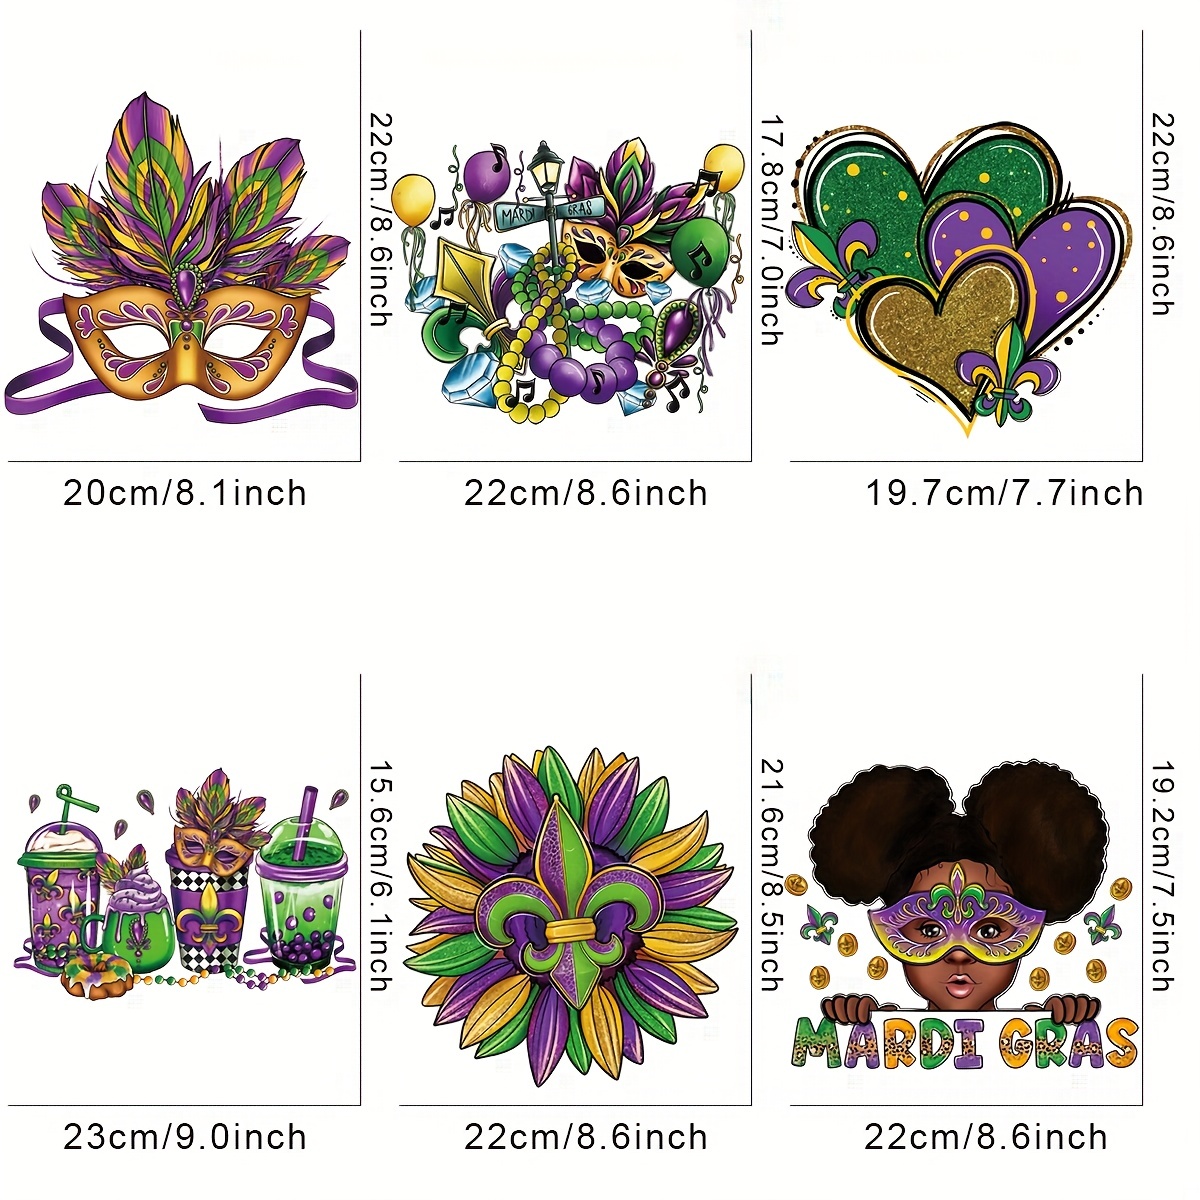 Mardi Gras Iron-On Transfer For Clothing Patches DIY Washable T-Shirts  Thermo Sticker Applique T8491